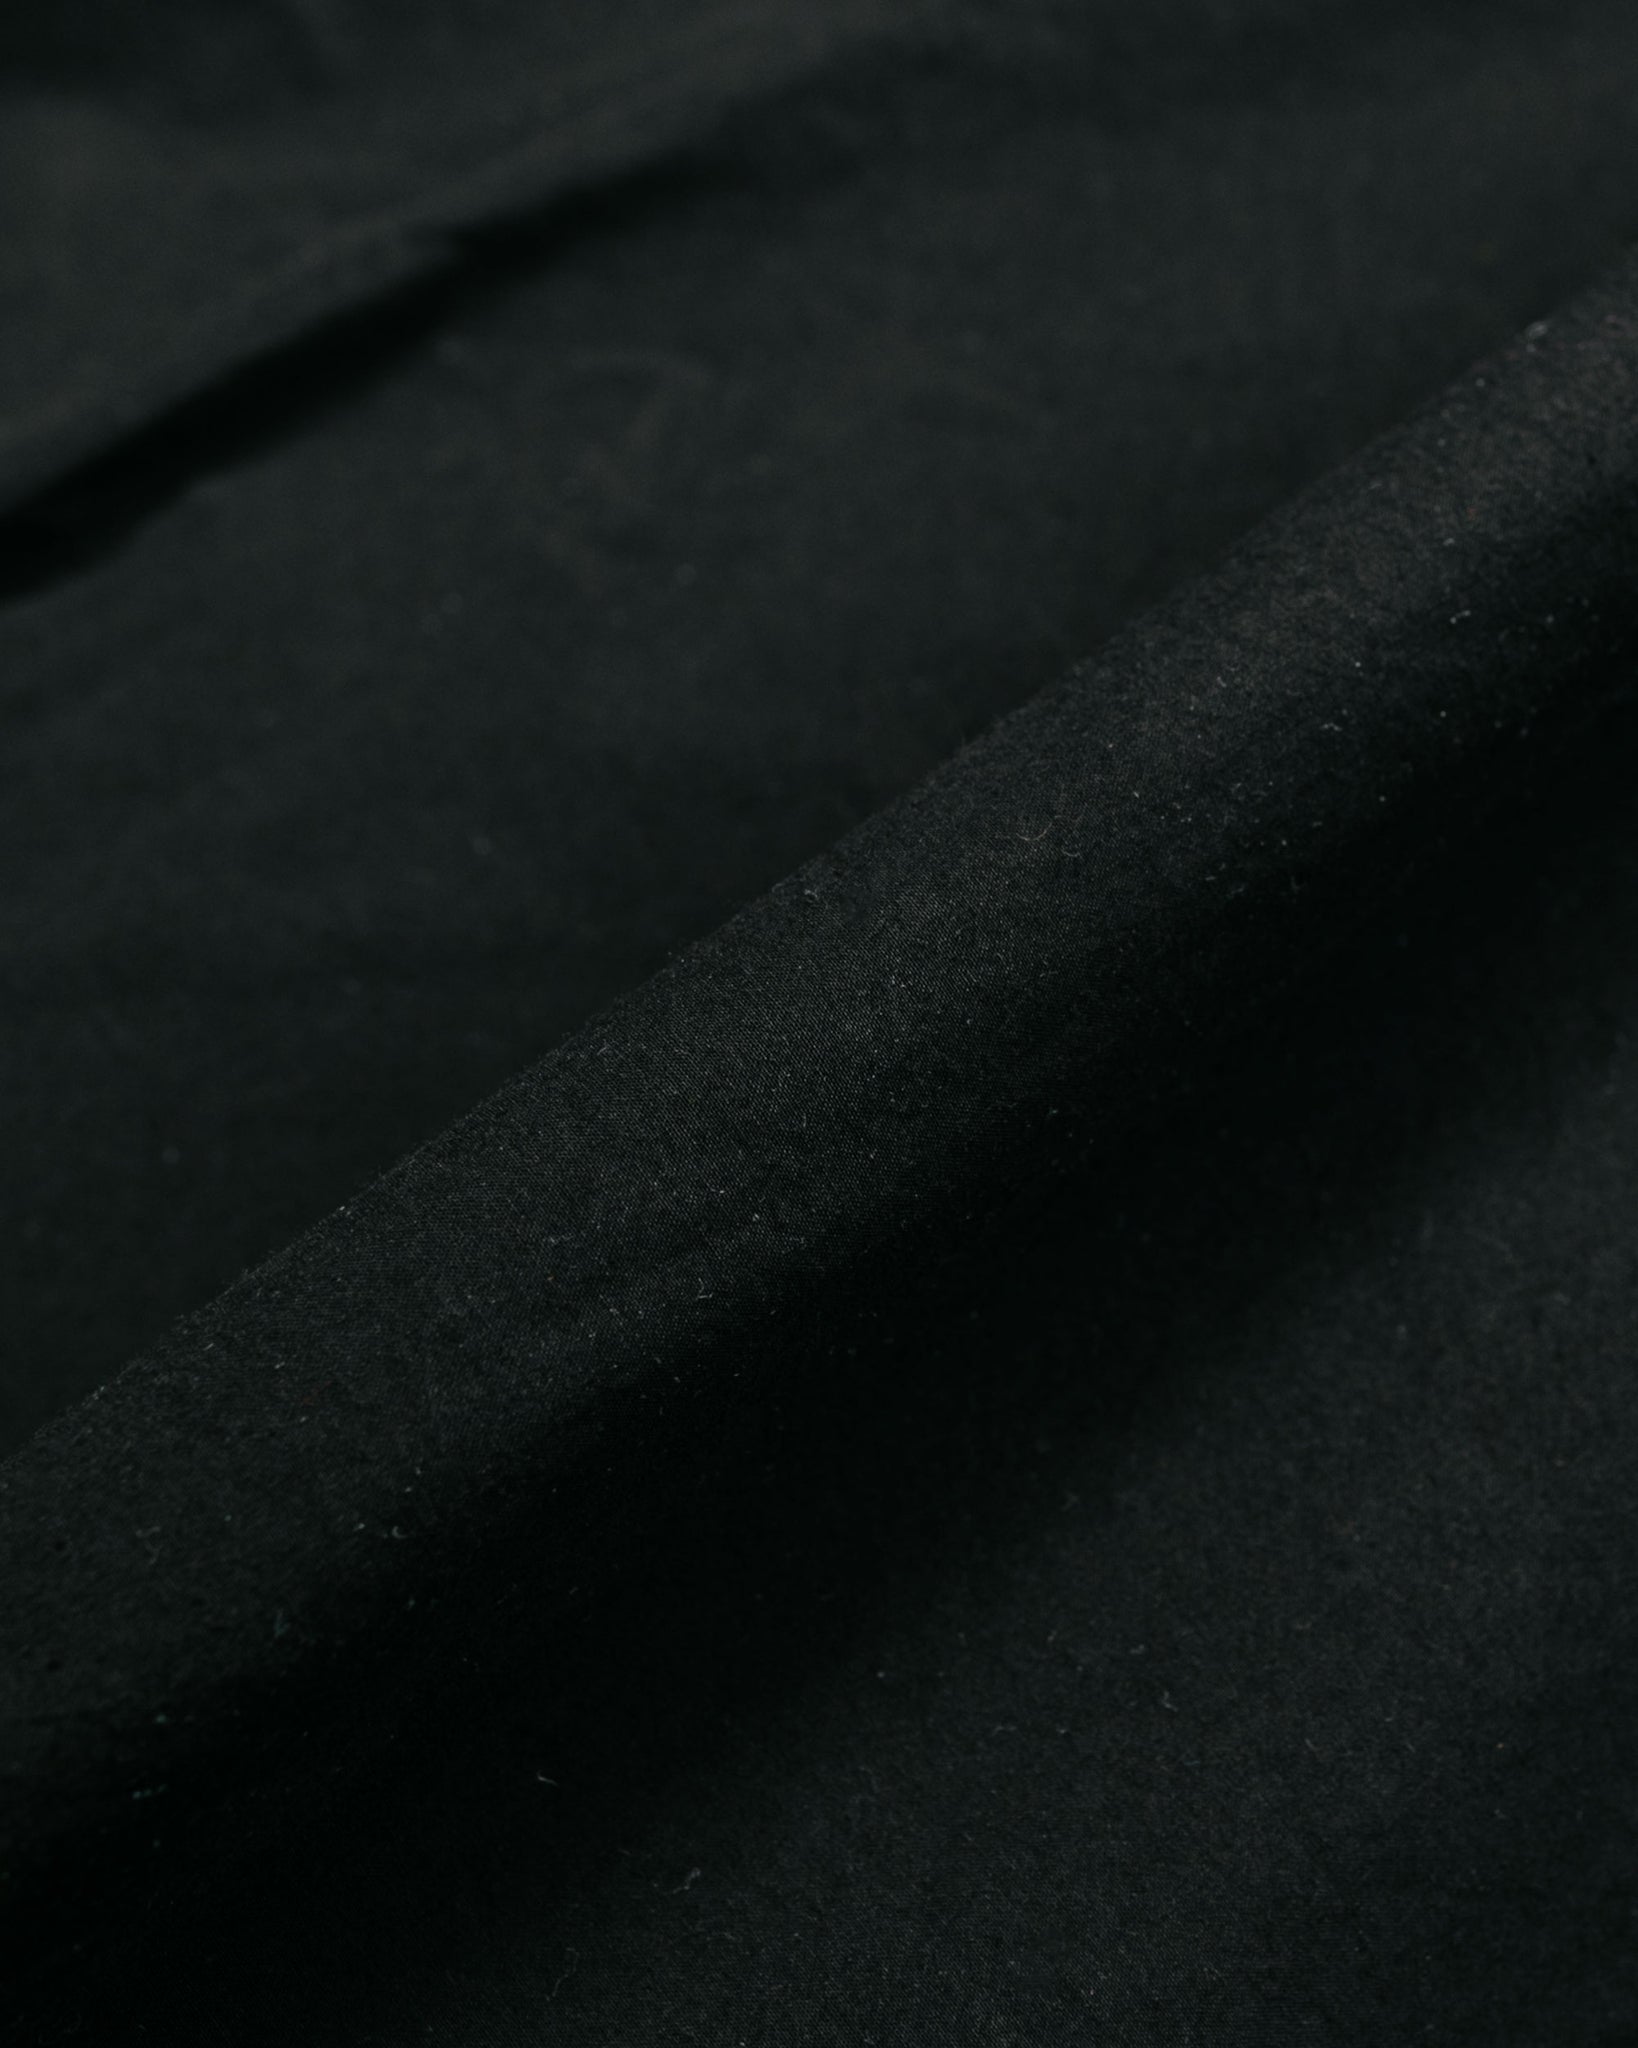 Norse Projects Osvald Tencel Black fabric